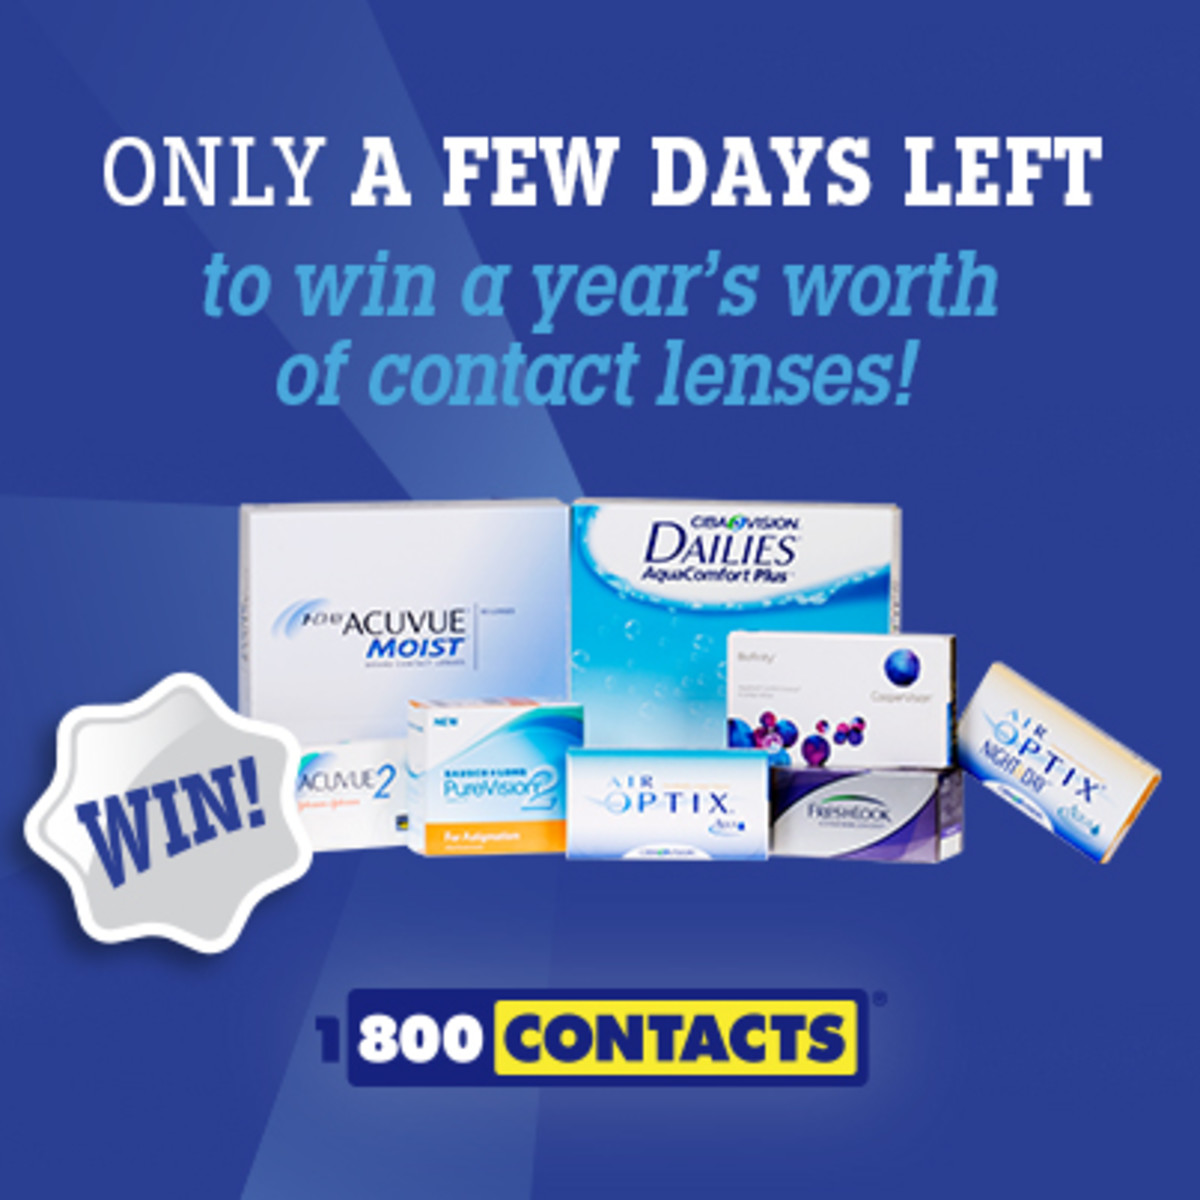 Win a year's worth of contact lenses!